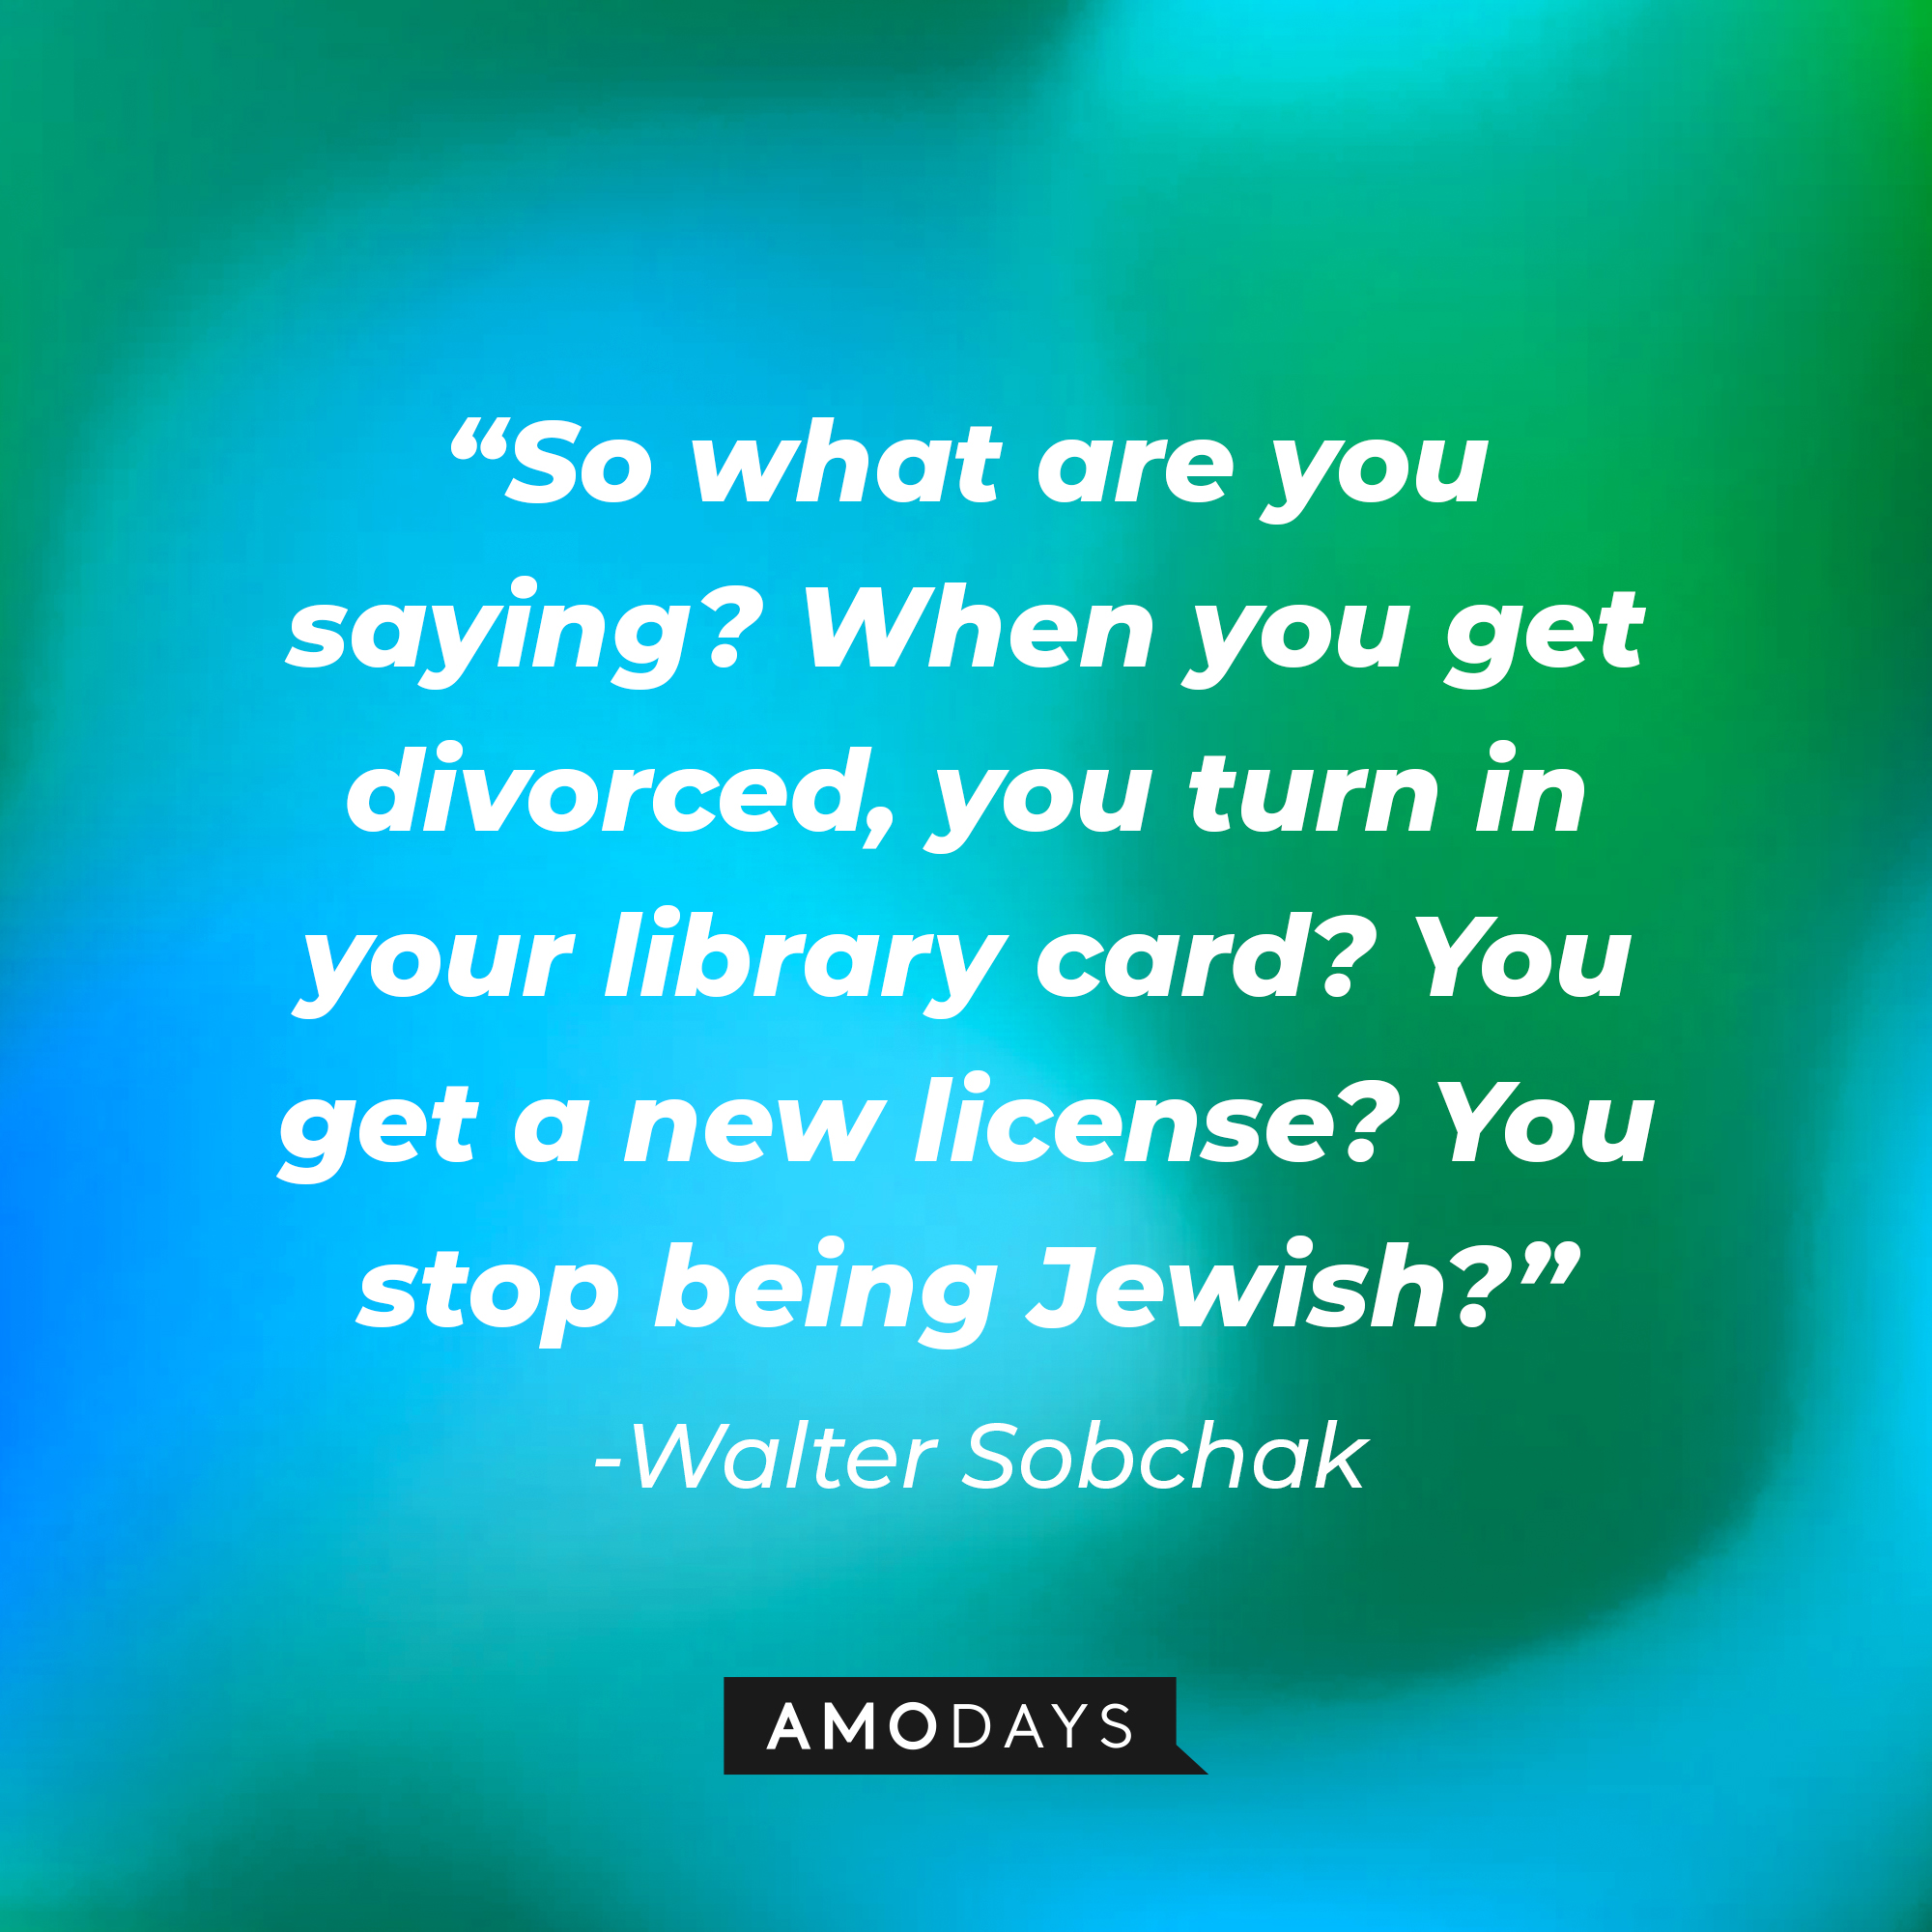 Walter Sobchak’s quote: “So what are you saying? When you get divorced you turn in your library card? You get a new license? You stop being Jewish?” | Source: AmoDays